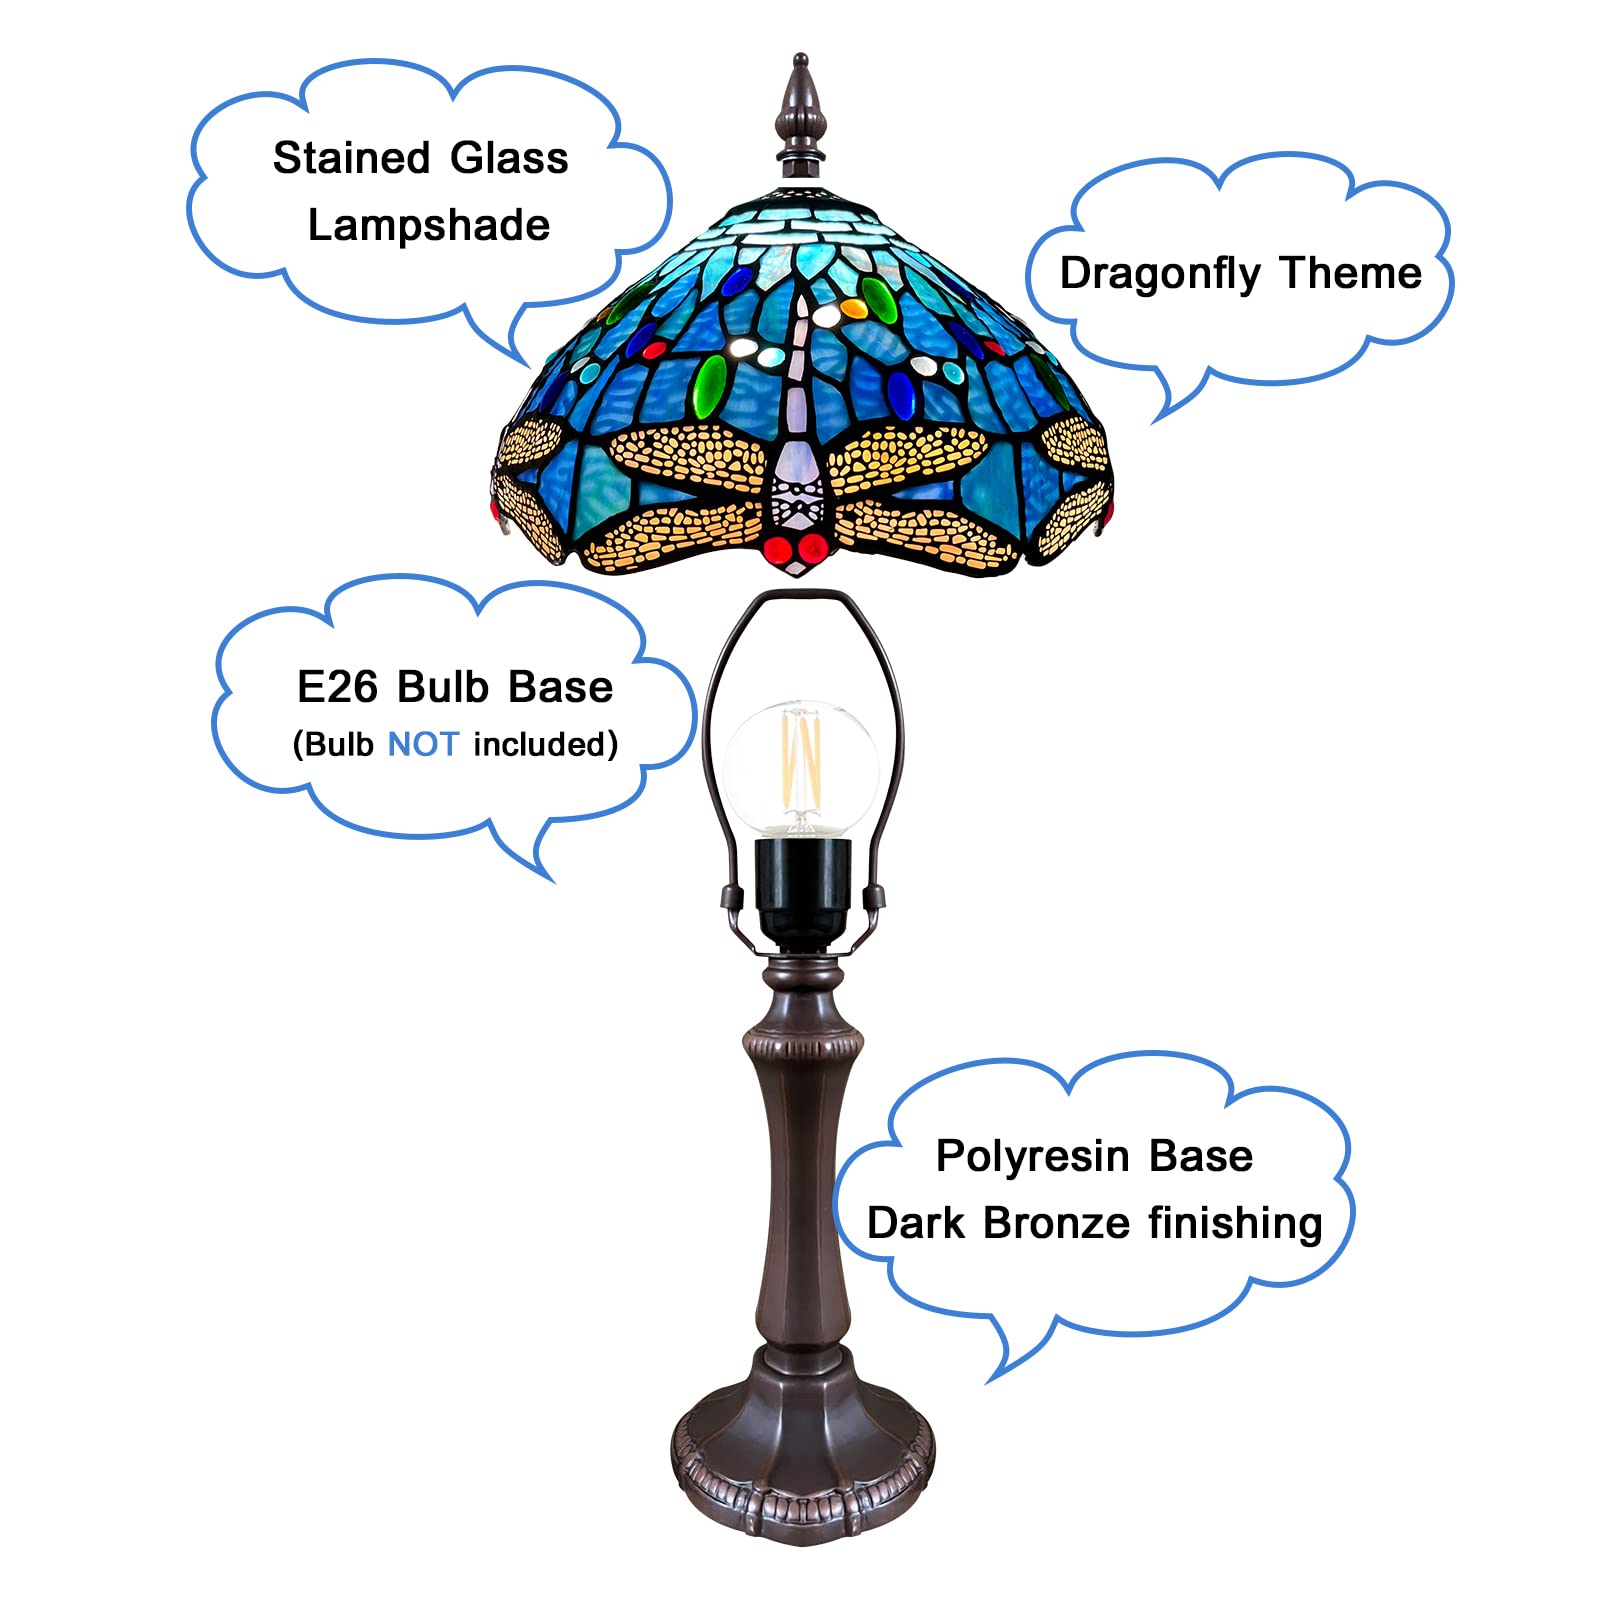 Vinplus Tiffany Lamp Table Lamp Blue Dragonfly Style Reading Desk Lamp 19" Tall - image 4 of 6